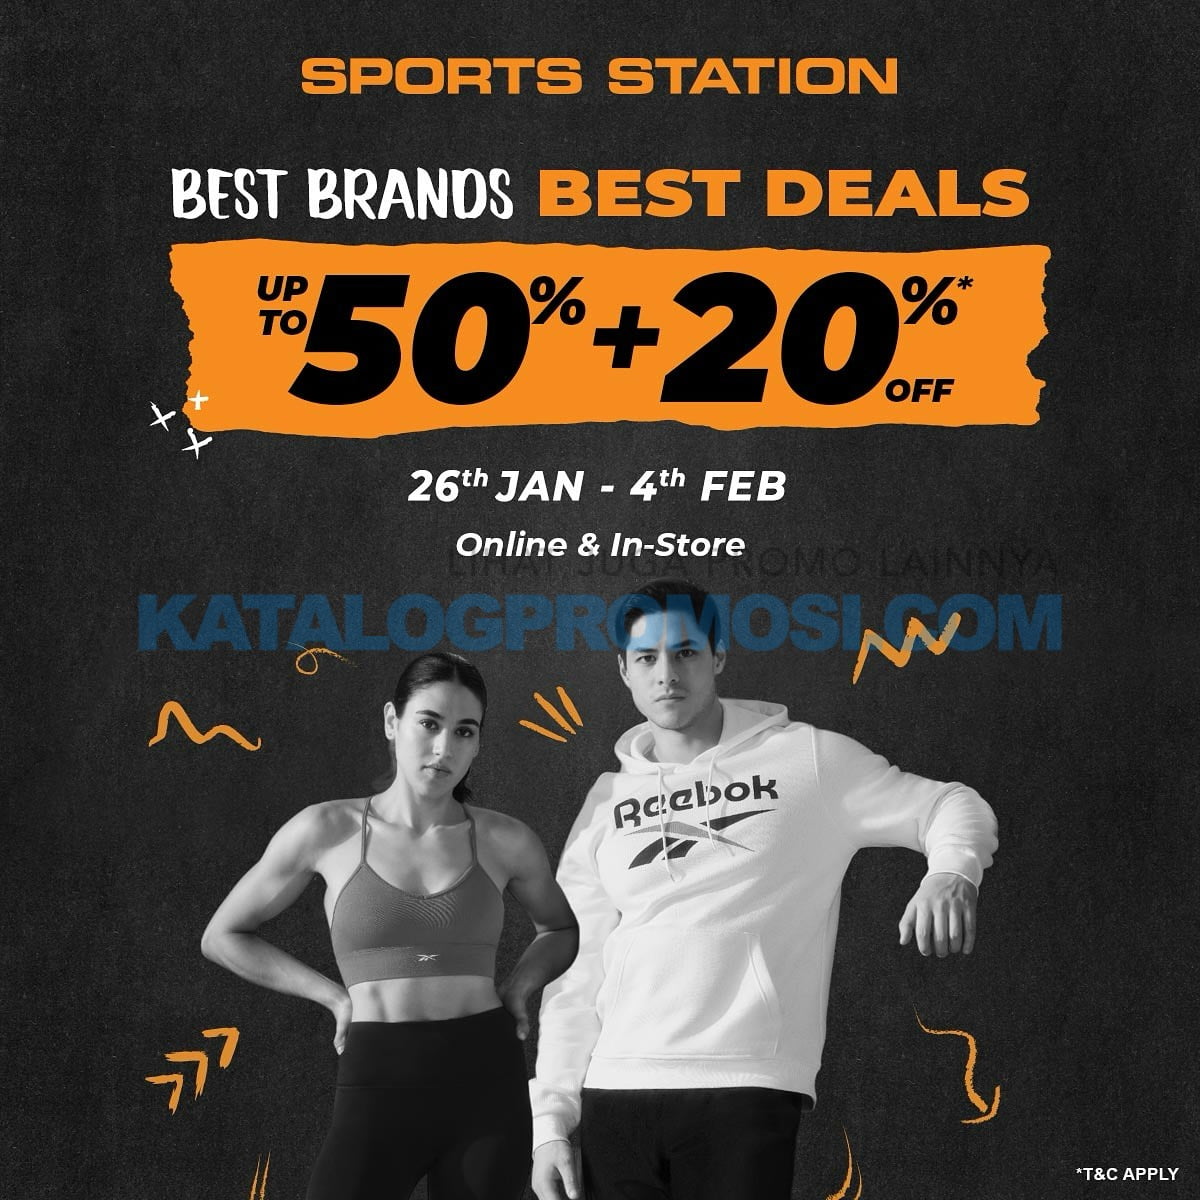 SPORTS STATION Promo BEST BRAND BEST DEALS DISC UP TO 50% + 20% Off*